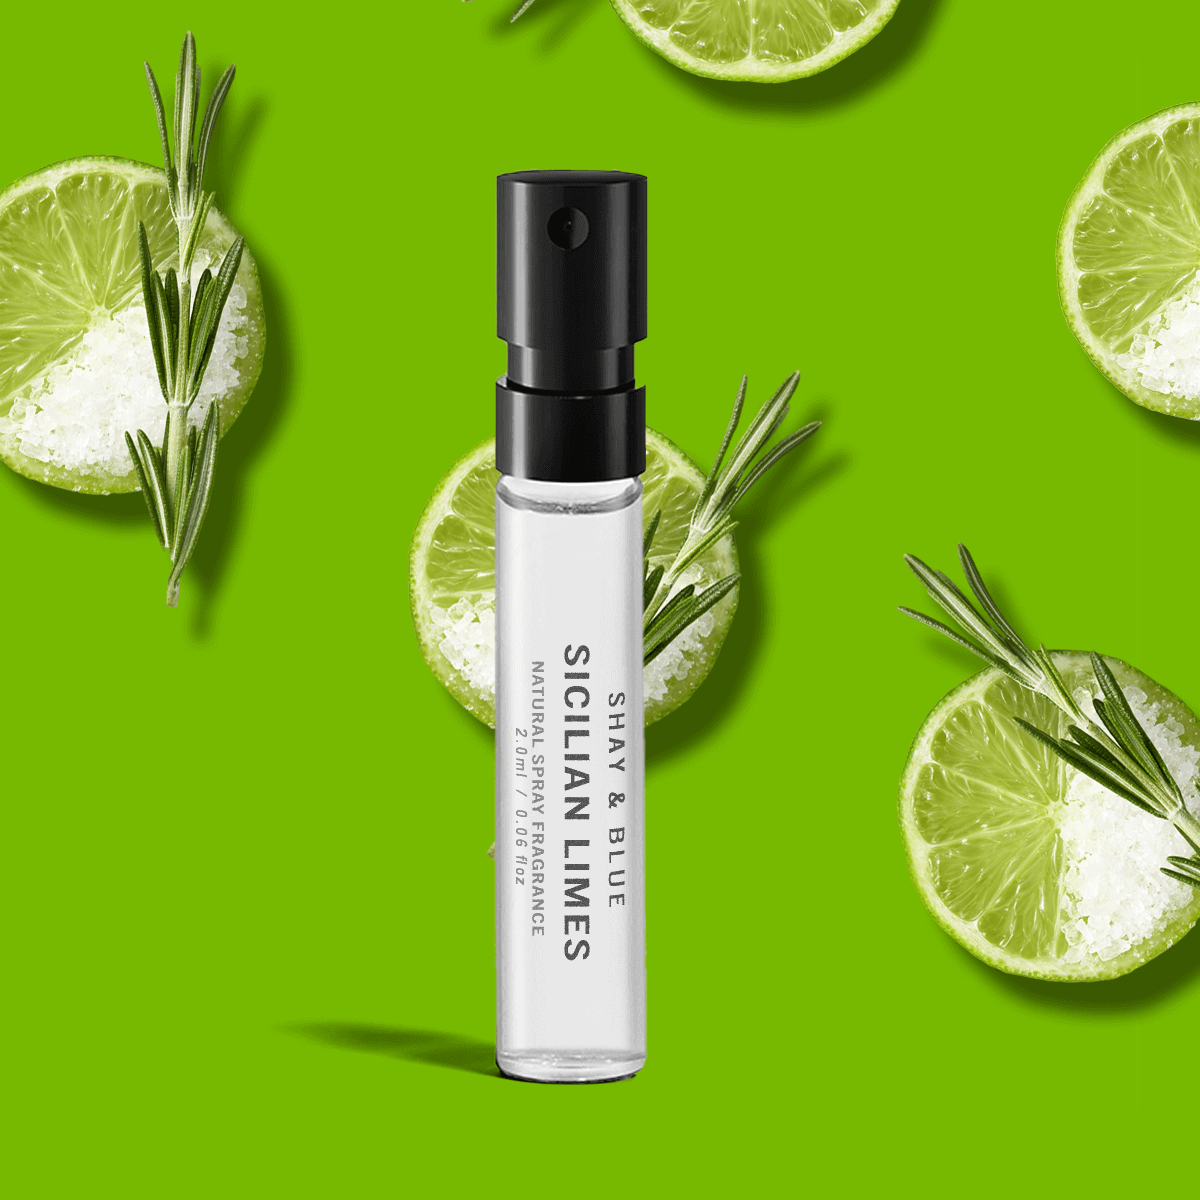 Sicilian Limes Fragrance 2ml | Tangy limes with a happy-hour hit of a salty margarita, rosemary and moss | Clean All Gender Fragrance | Shay & Blue